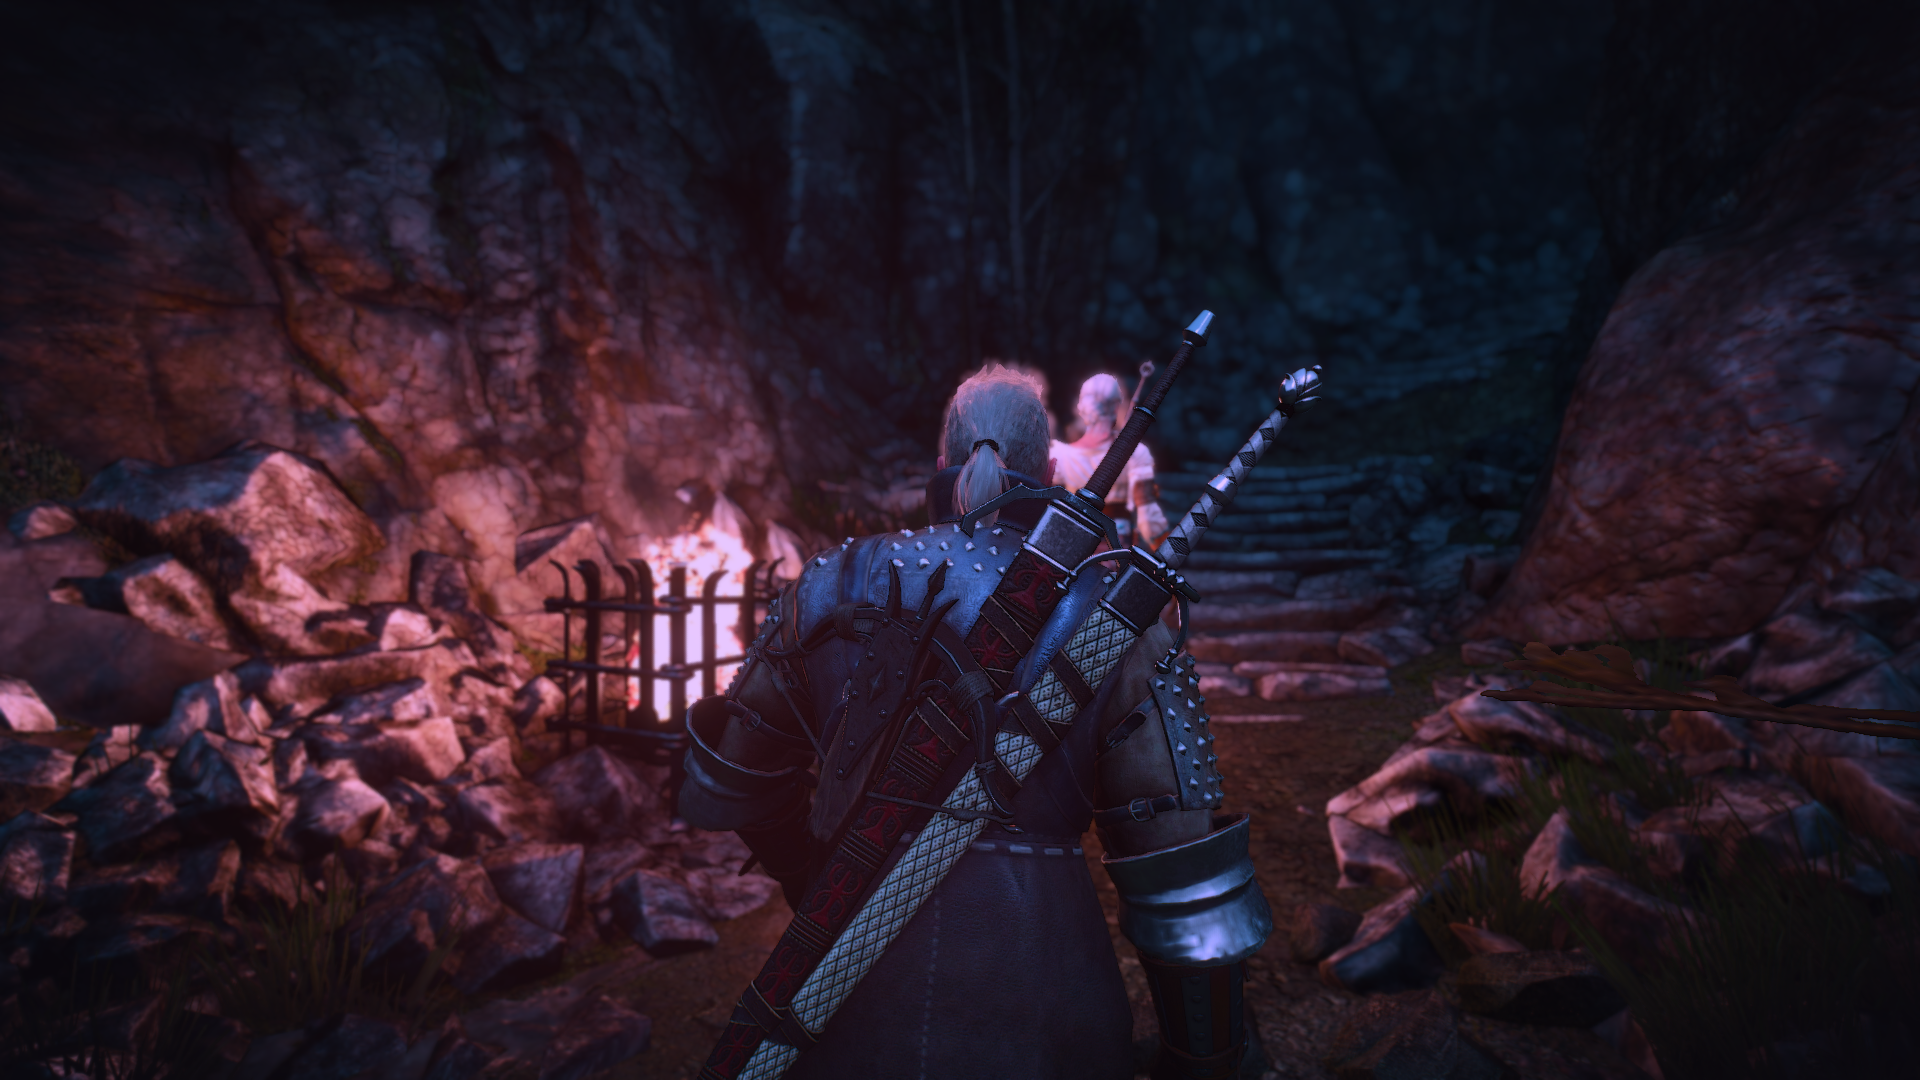 General 1920x1080 The Witcher 3: Wild Hunt Geralt of Rivia video games PC gaming RPG screen shot